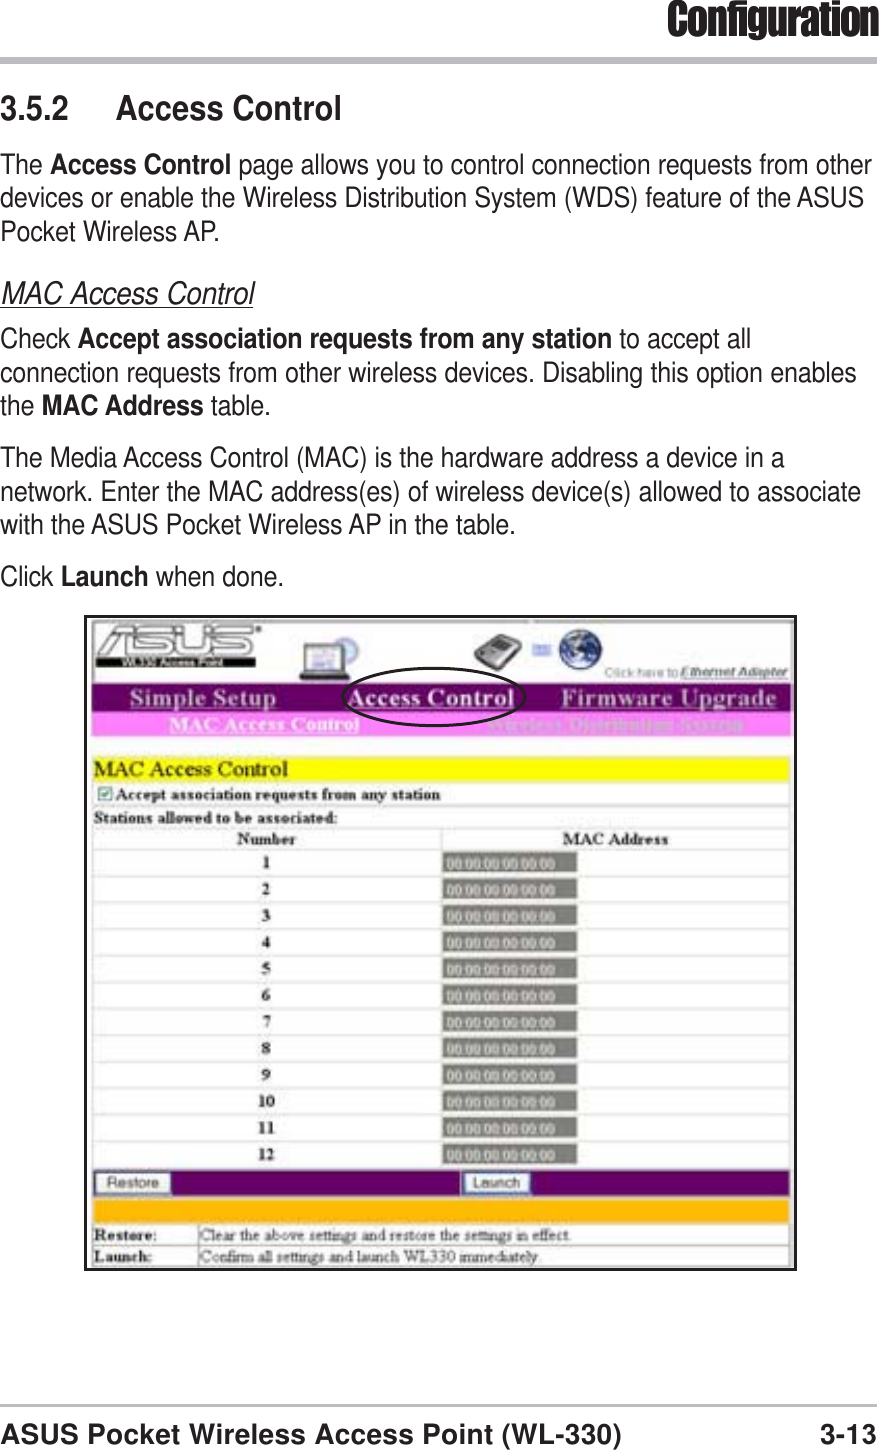 3-13ASUS Pocket Wireless Access Point (WL-330)Configuration3.5.2 Access ControlThe Access Control page allows you to control connection requests from otherdevices or enable the Wireless Distribution System (WDS) feature of the ASUSPocket Wireless AP.MAC Access ControlCheck Accept association requests from any station to accept allconnection requests from other wireless devices. Disabling this option enablesthe MAC Address table.The Media Access Control (MAC) is the hardware address a device in anetwork. Enter the MAC address(es) of wireless device(s) allowed to associatewith the ASUS Pocket Wireless AP in the table.Click Launch when done.